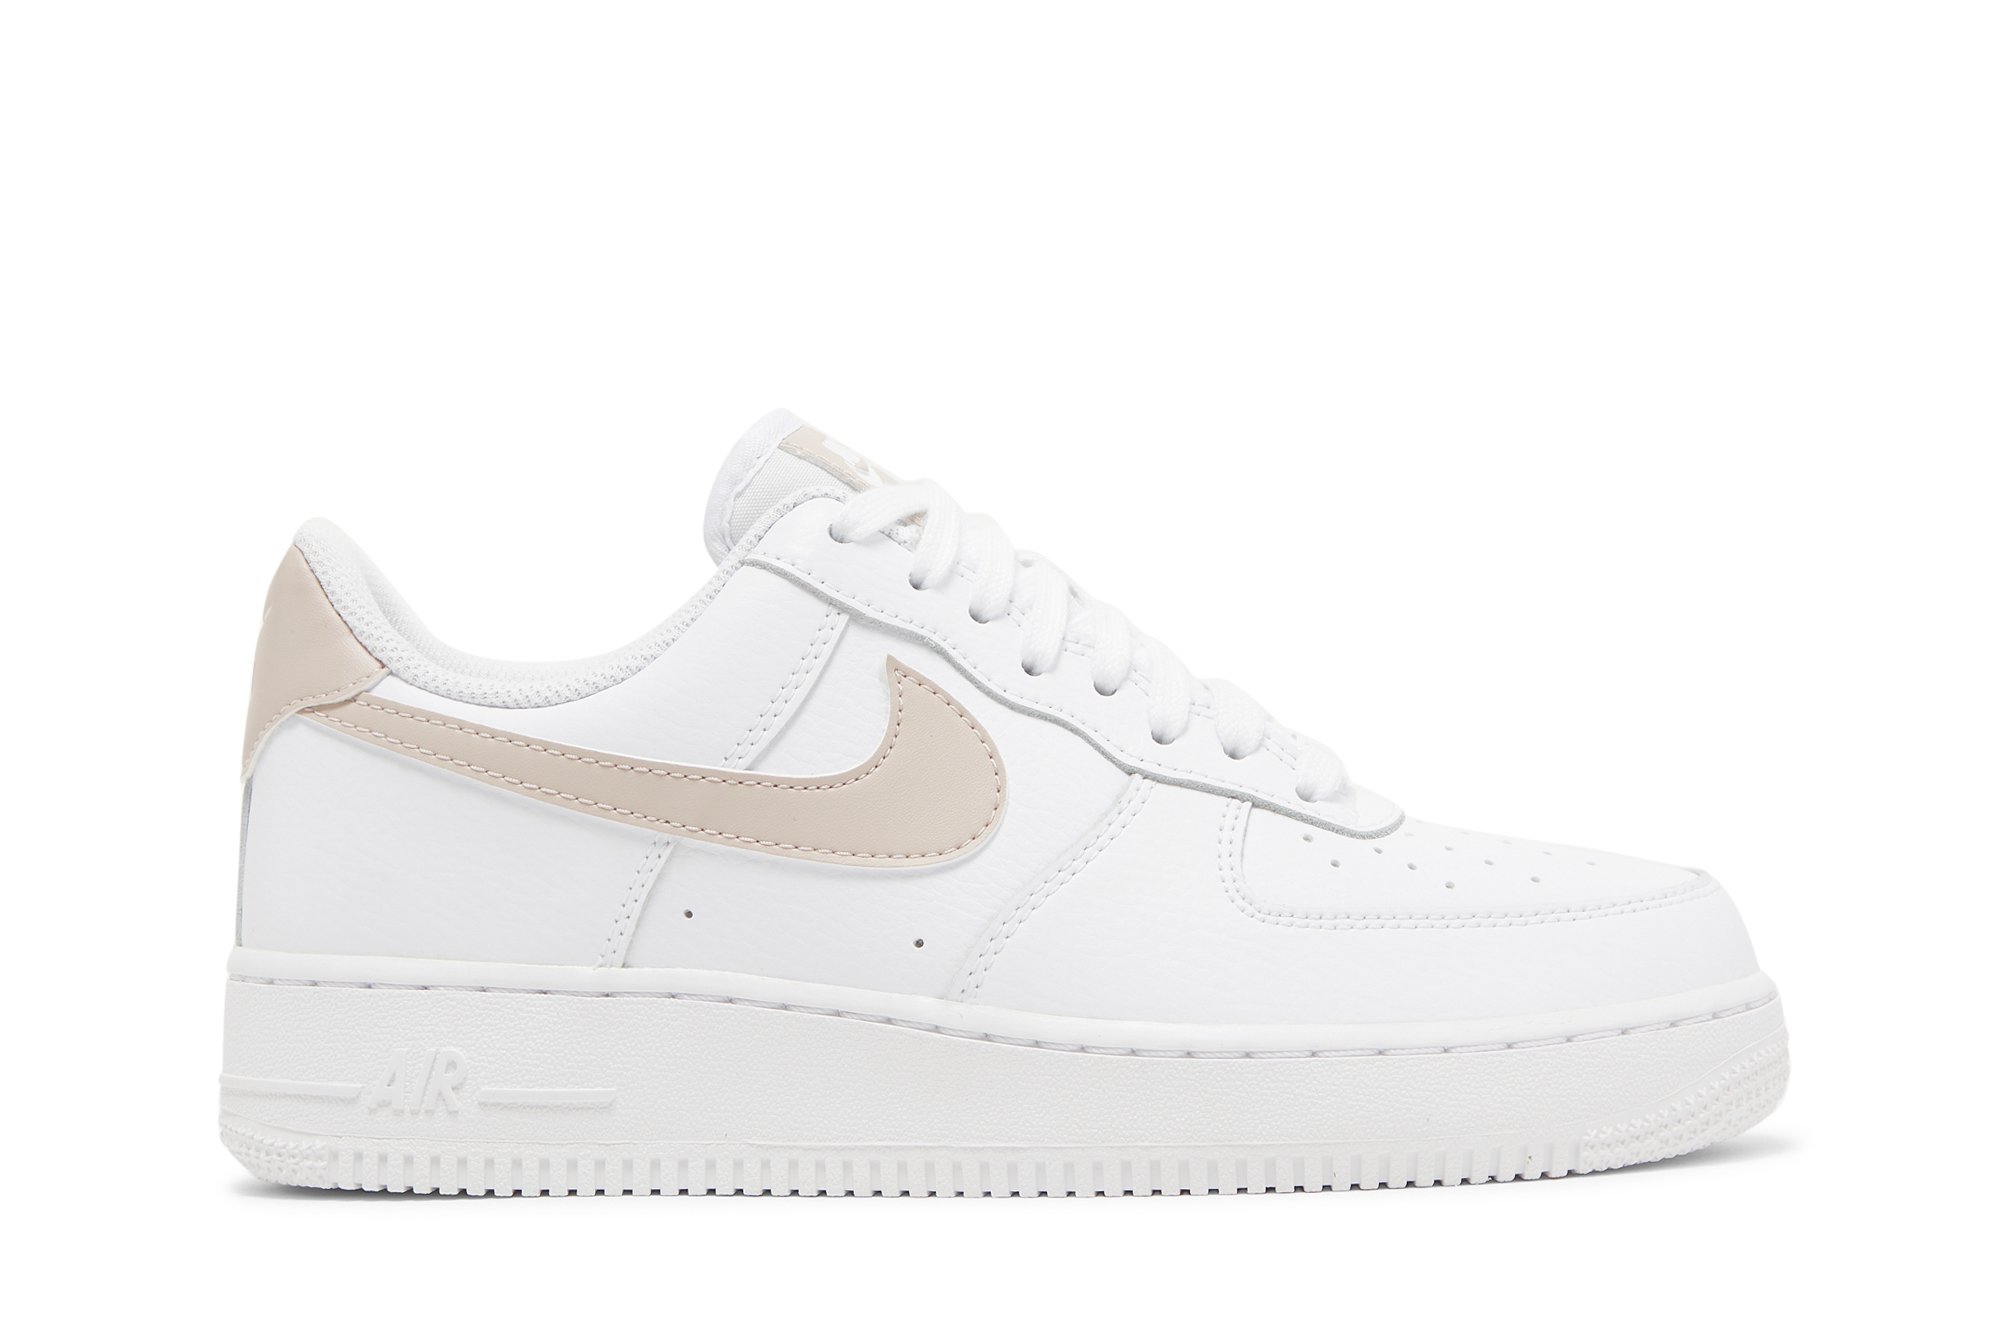 Buy Wmns Air Force 1 '07 'Satin Pink' - 315115 169 | GOAT